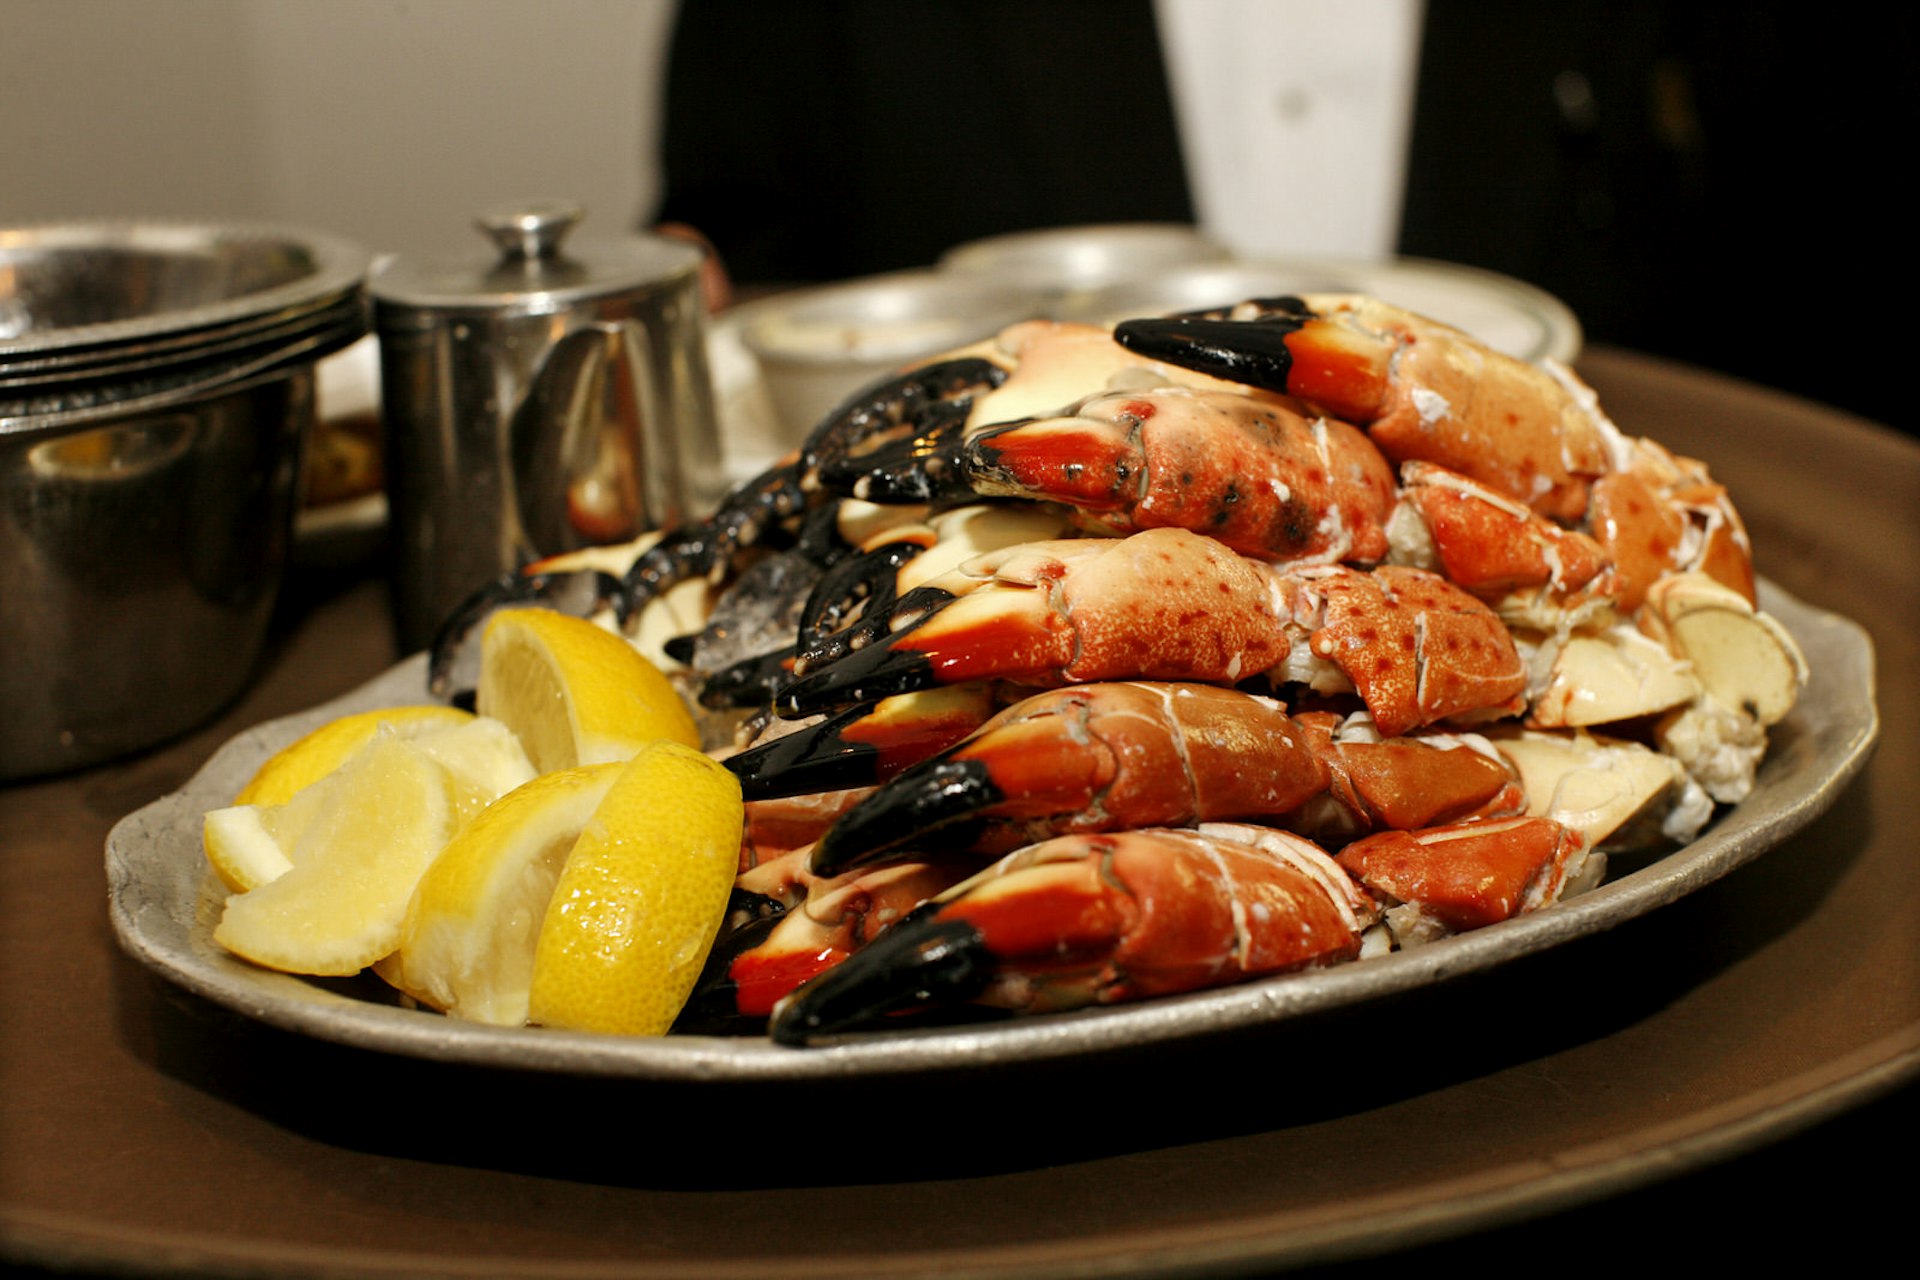 A plate of stone crab legs is seen with lemon slices © Hoberman Collection / Contributor / Getty Images